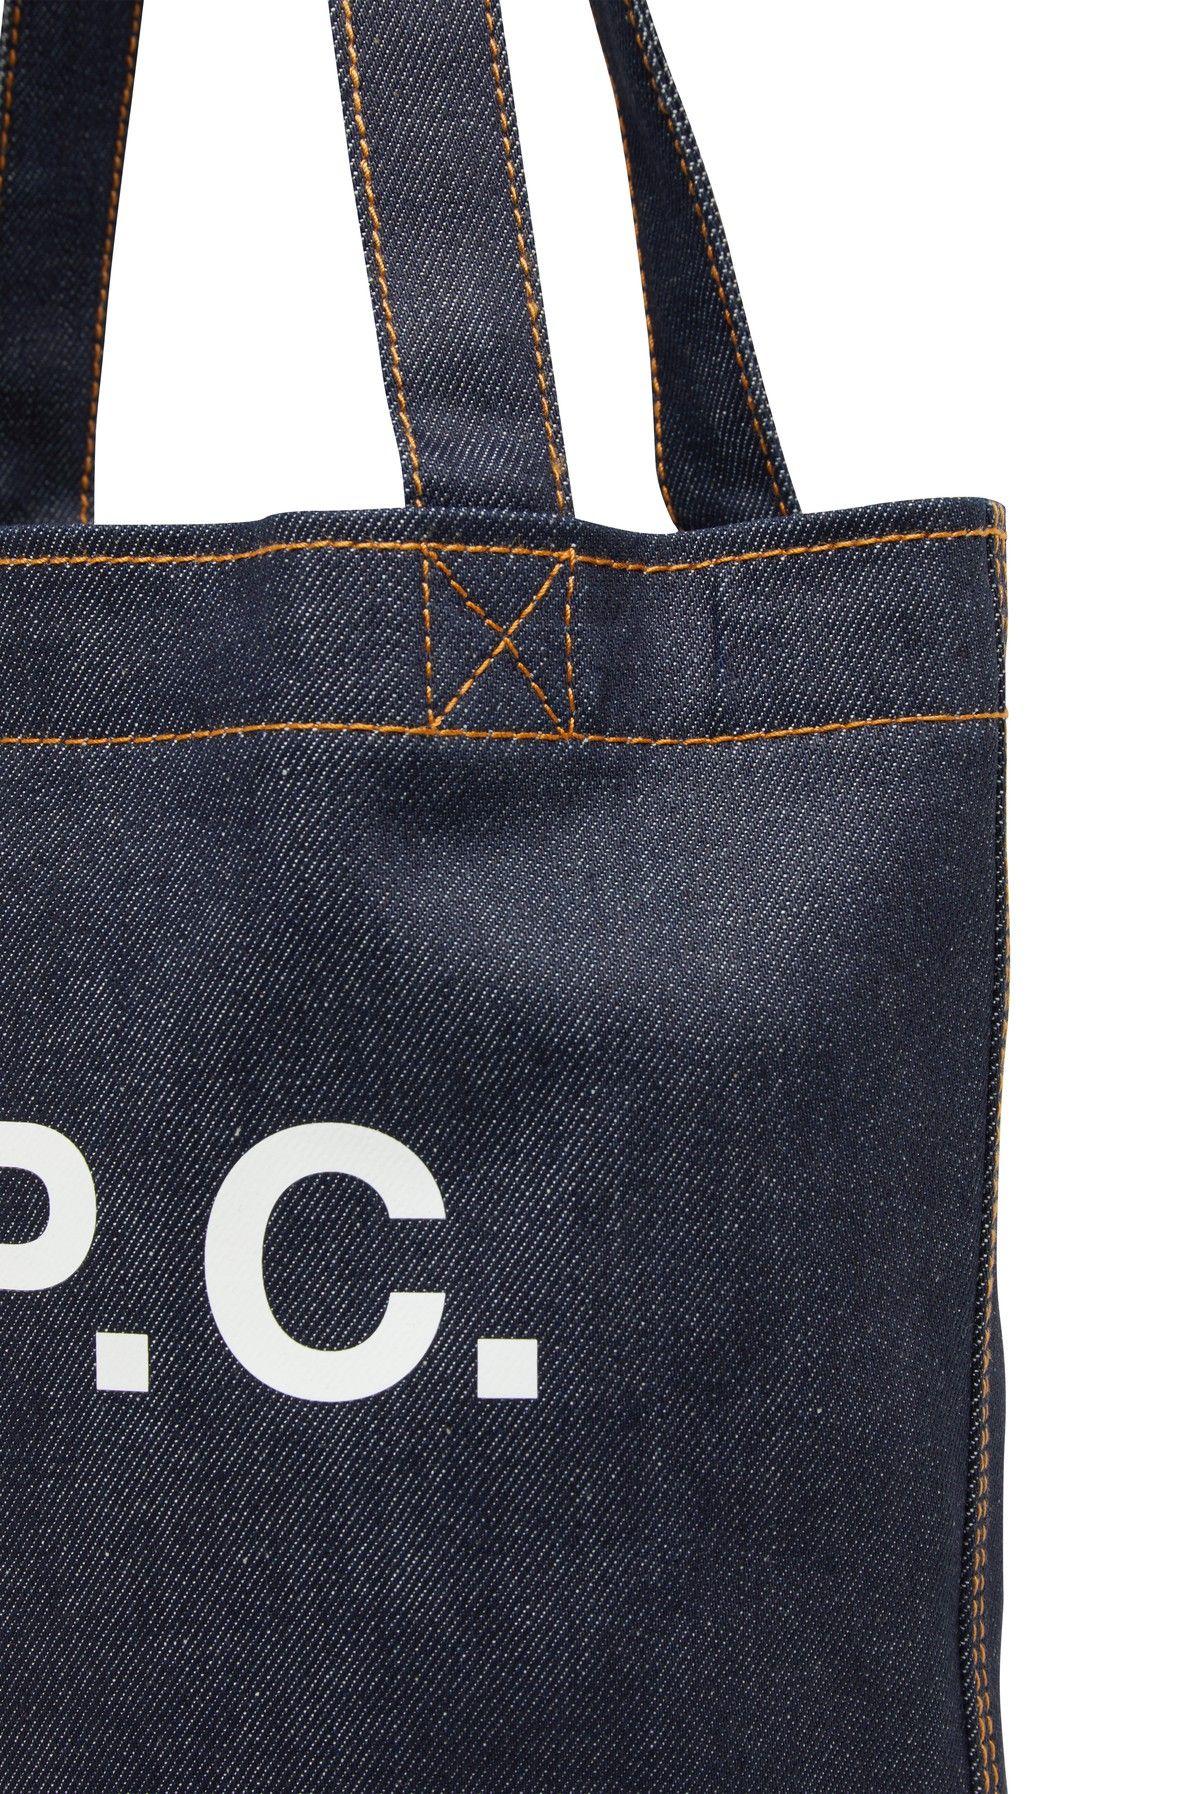 A.P.C. Axel Small Tote Bag in Blue | Lyst